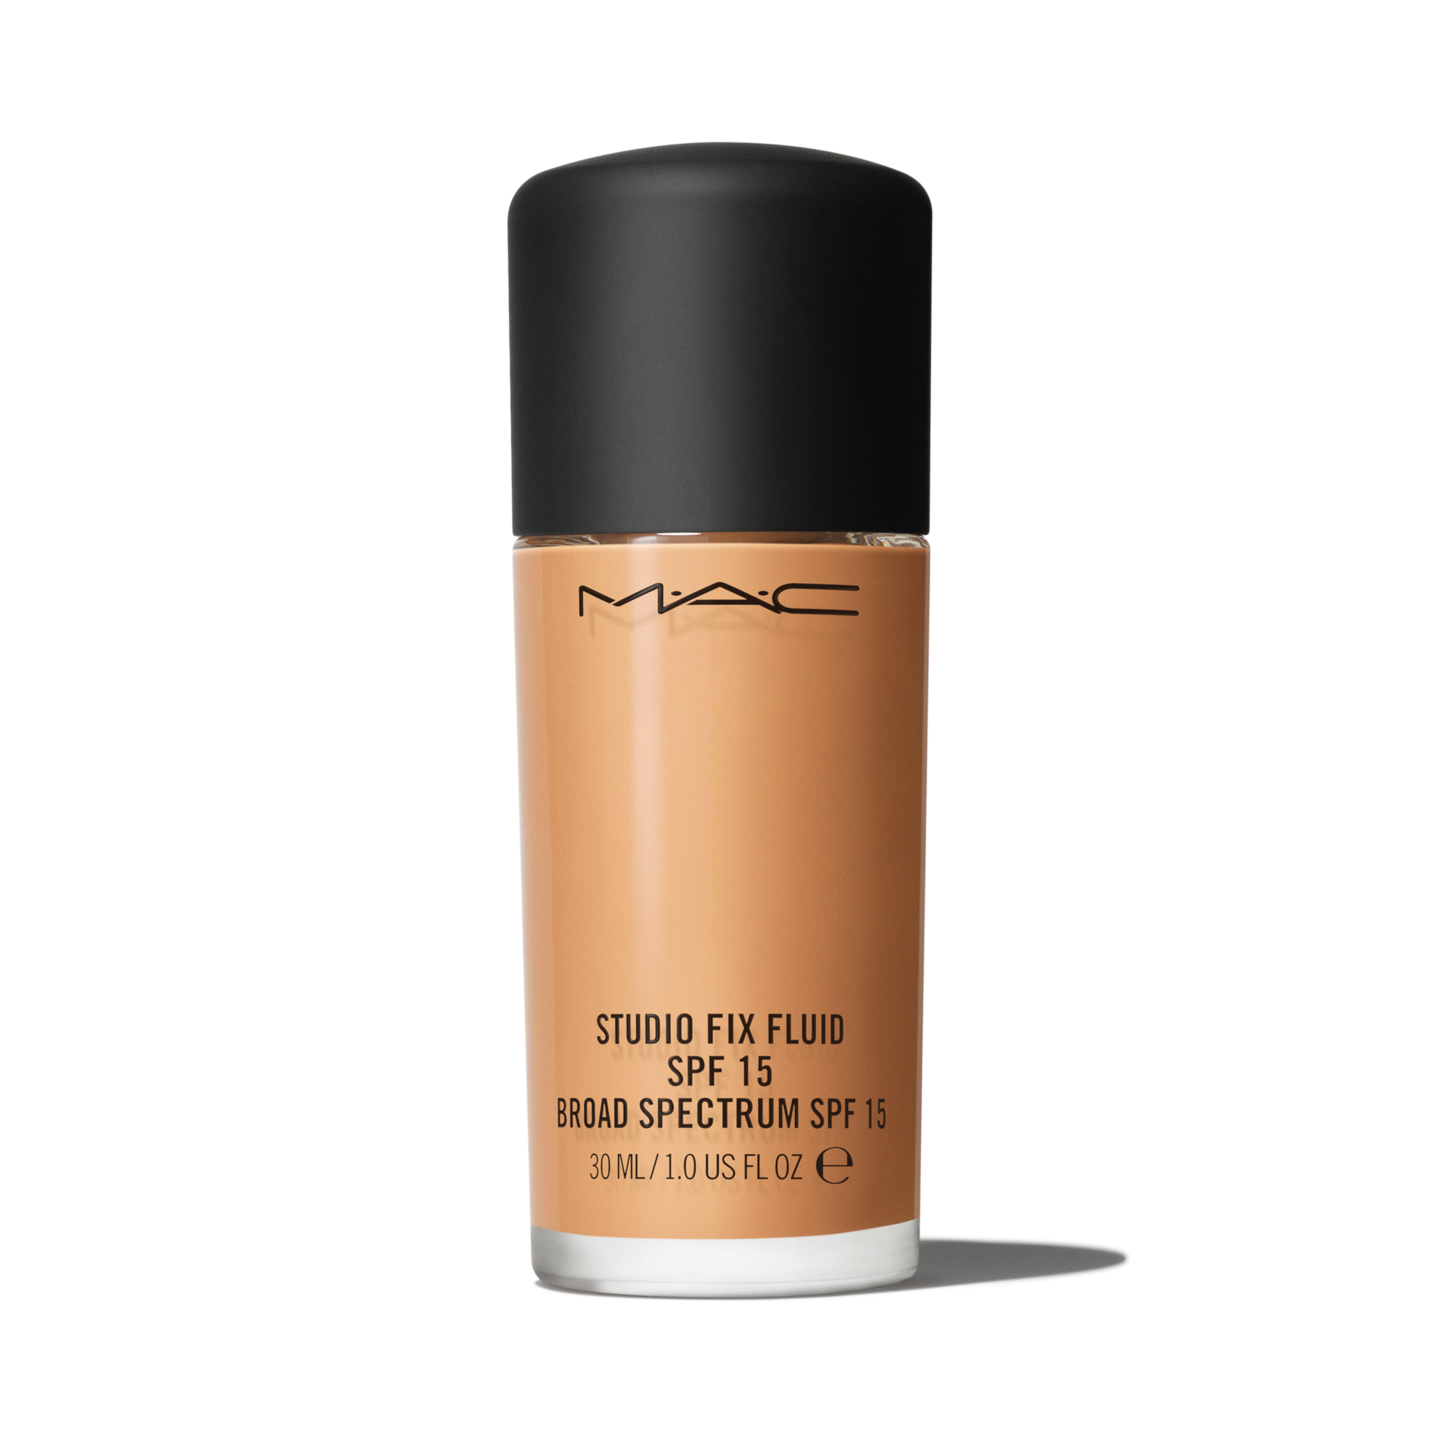 Studio Fix Fluid Foundation with SPF 15, 63 Shades Including NC20